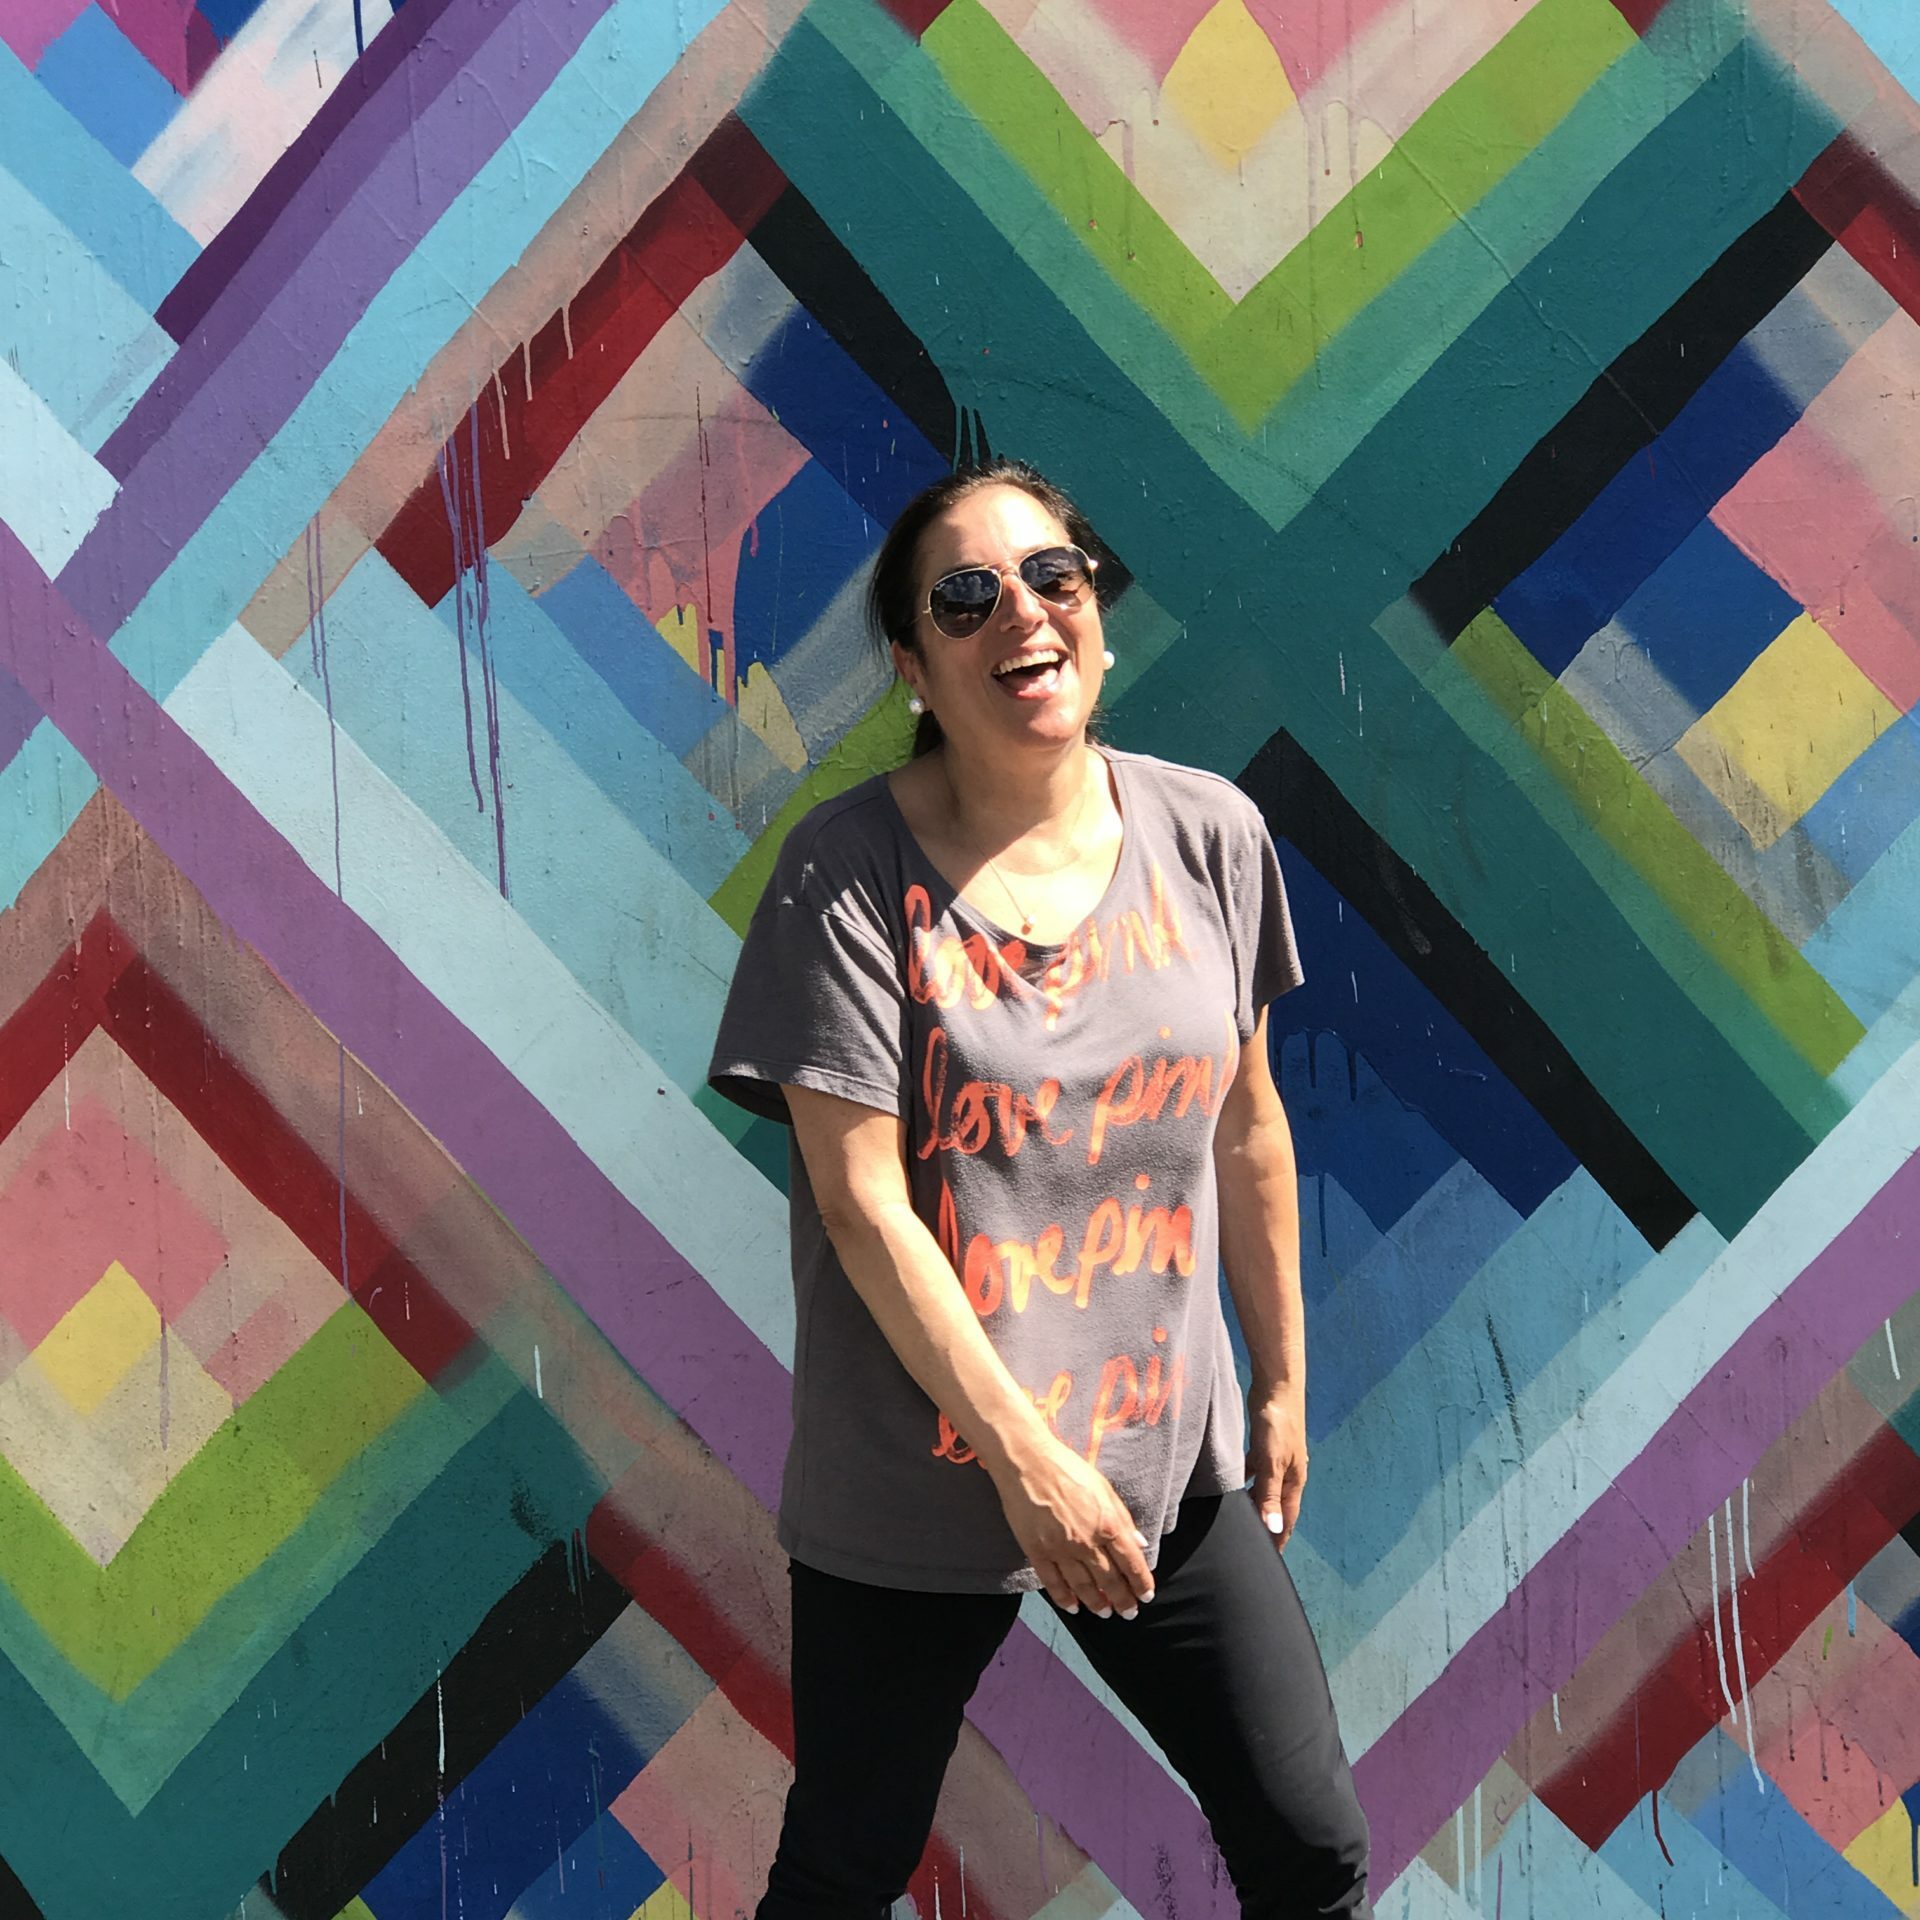 A photo of Shelley who has brown hair pulled back, and wearing sunglasses in front of a brightly colored background.